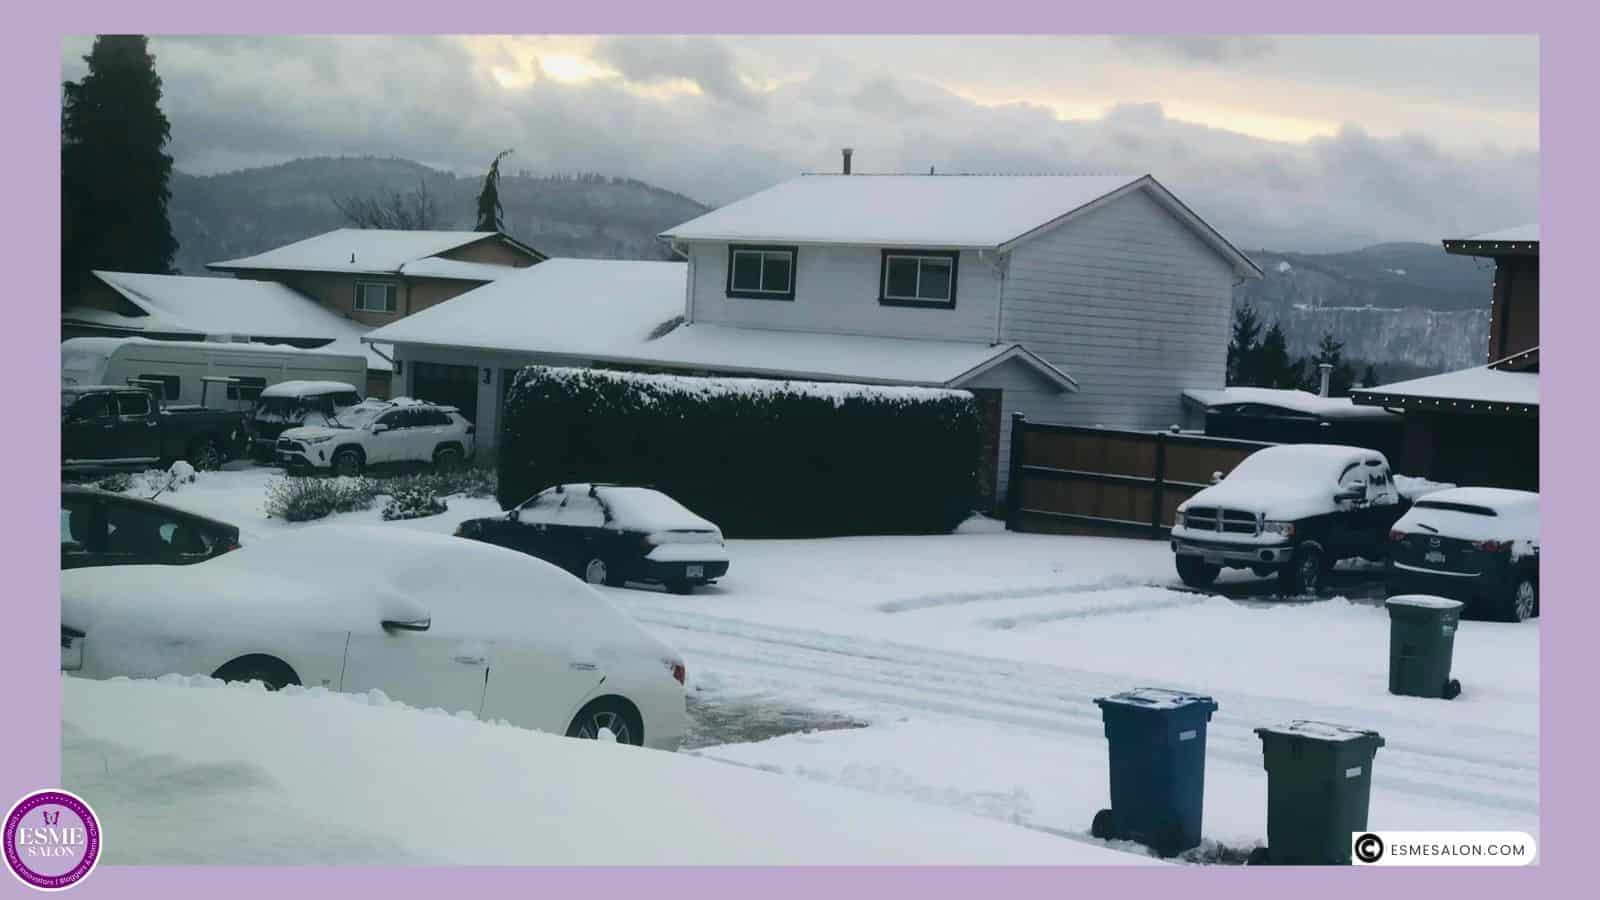 an image of a fresh snow dump and cars and houses covered in snow